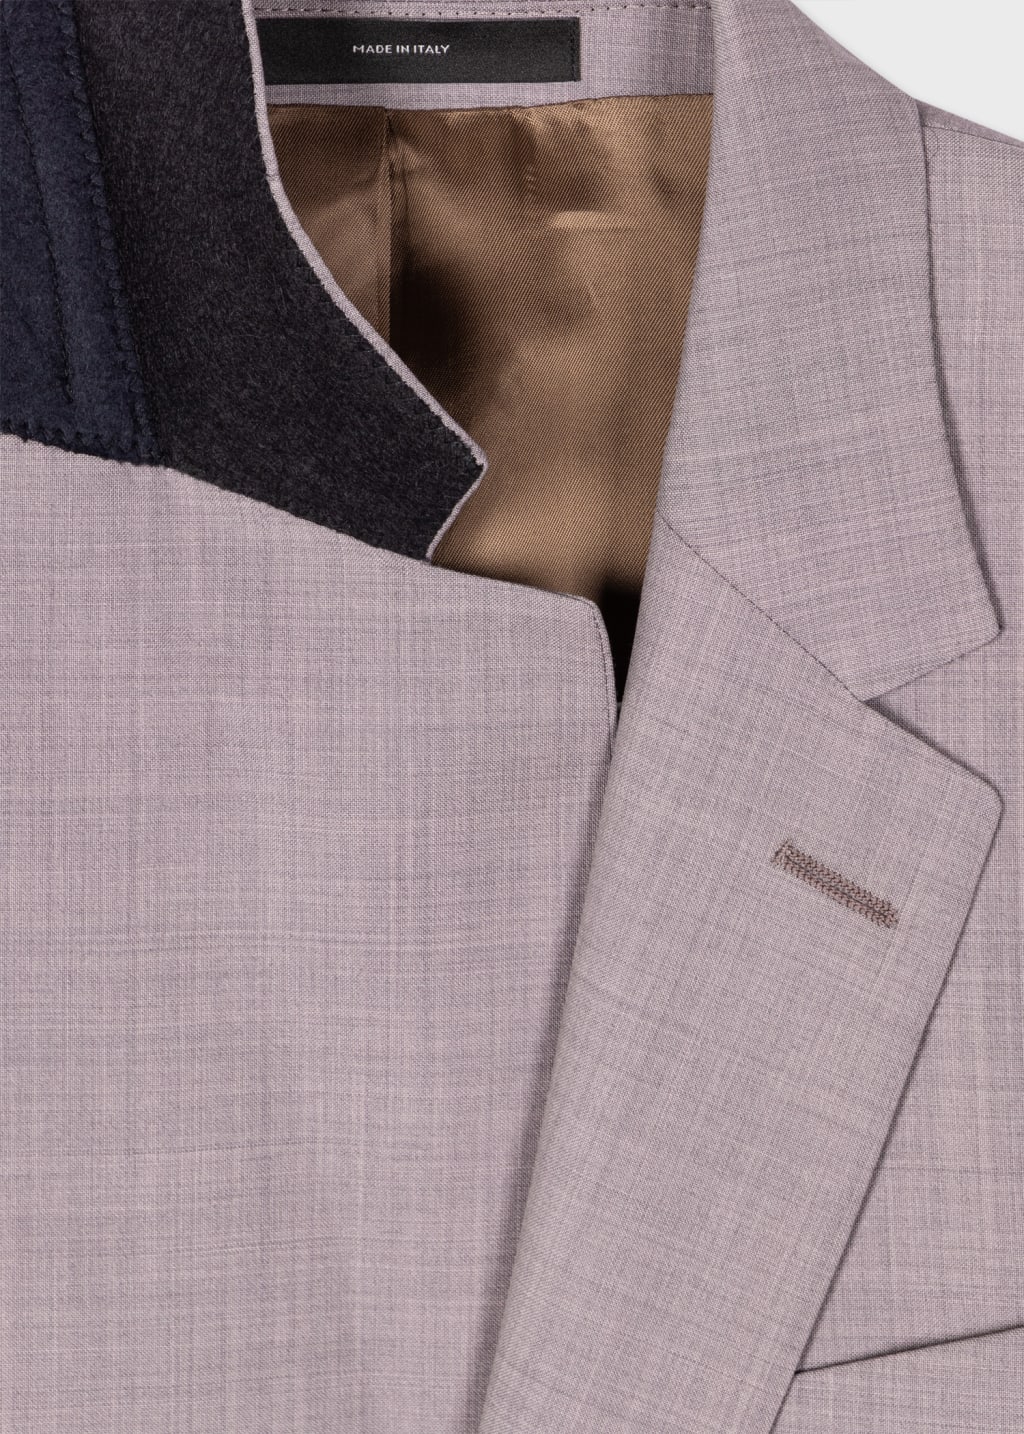 Detail View - The Soho - Tailored-Fit Lavender Wool Suit Paul Smith